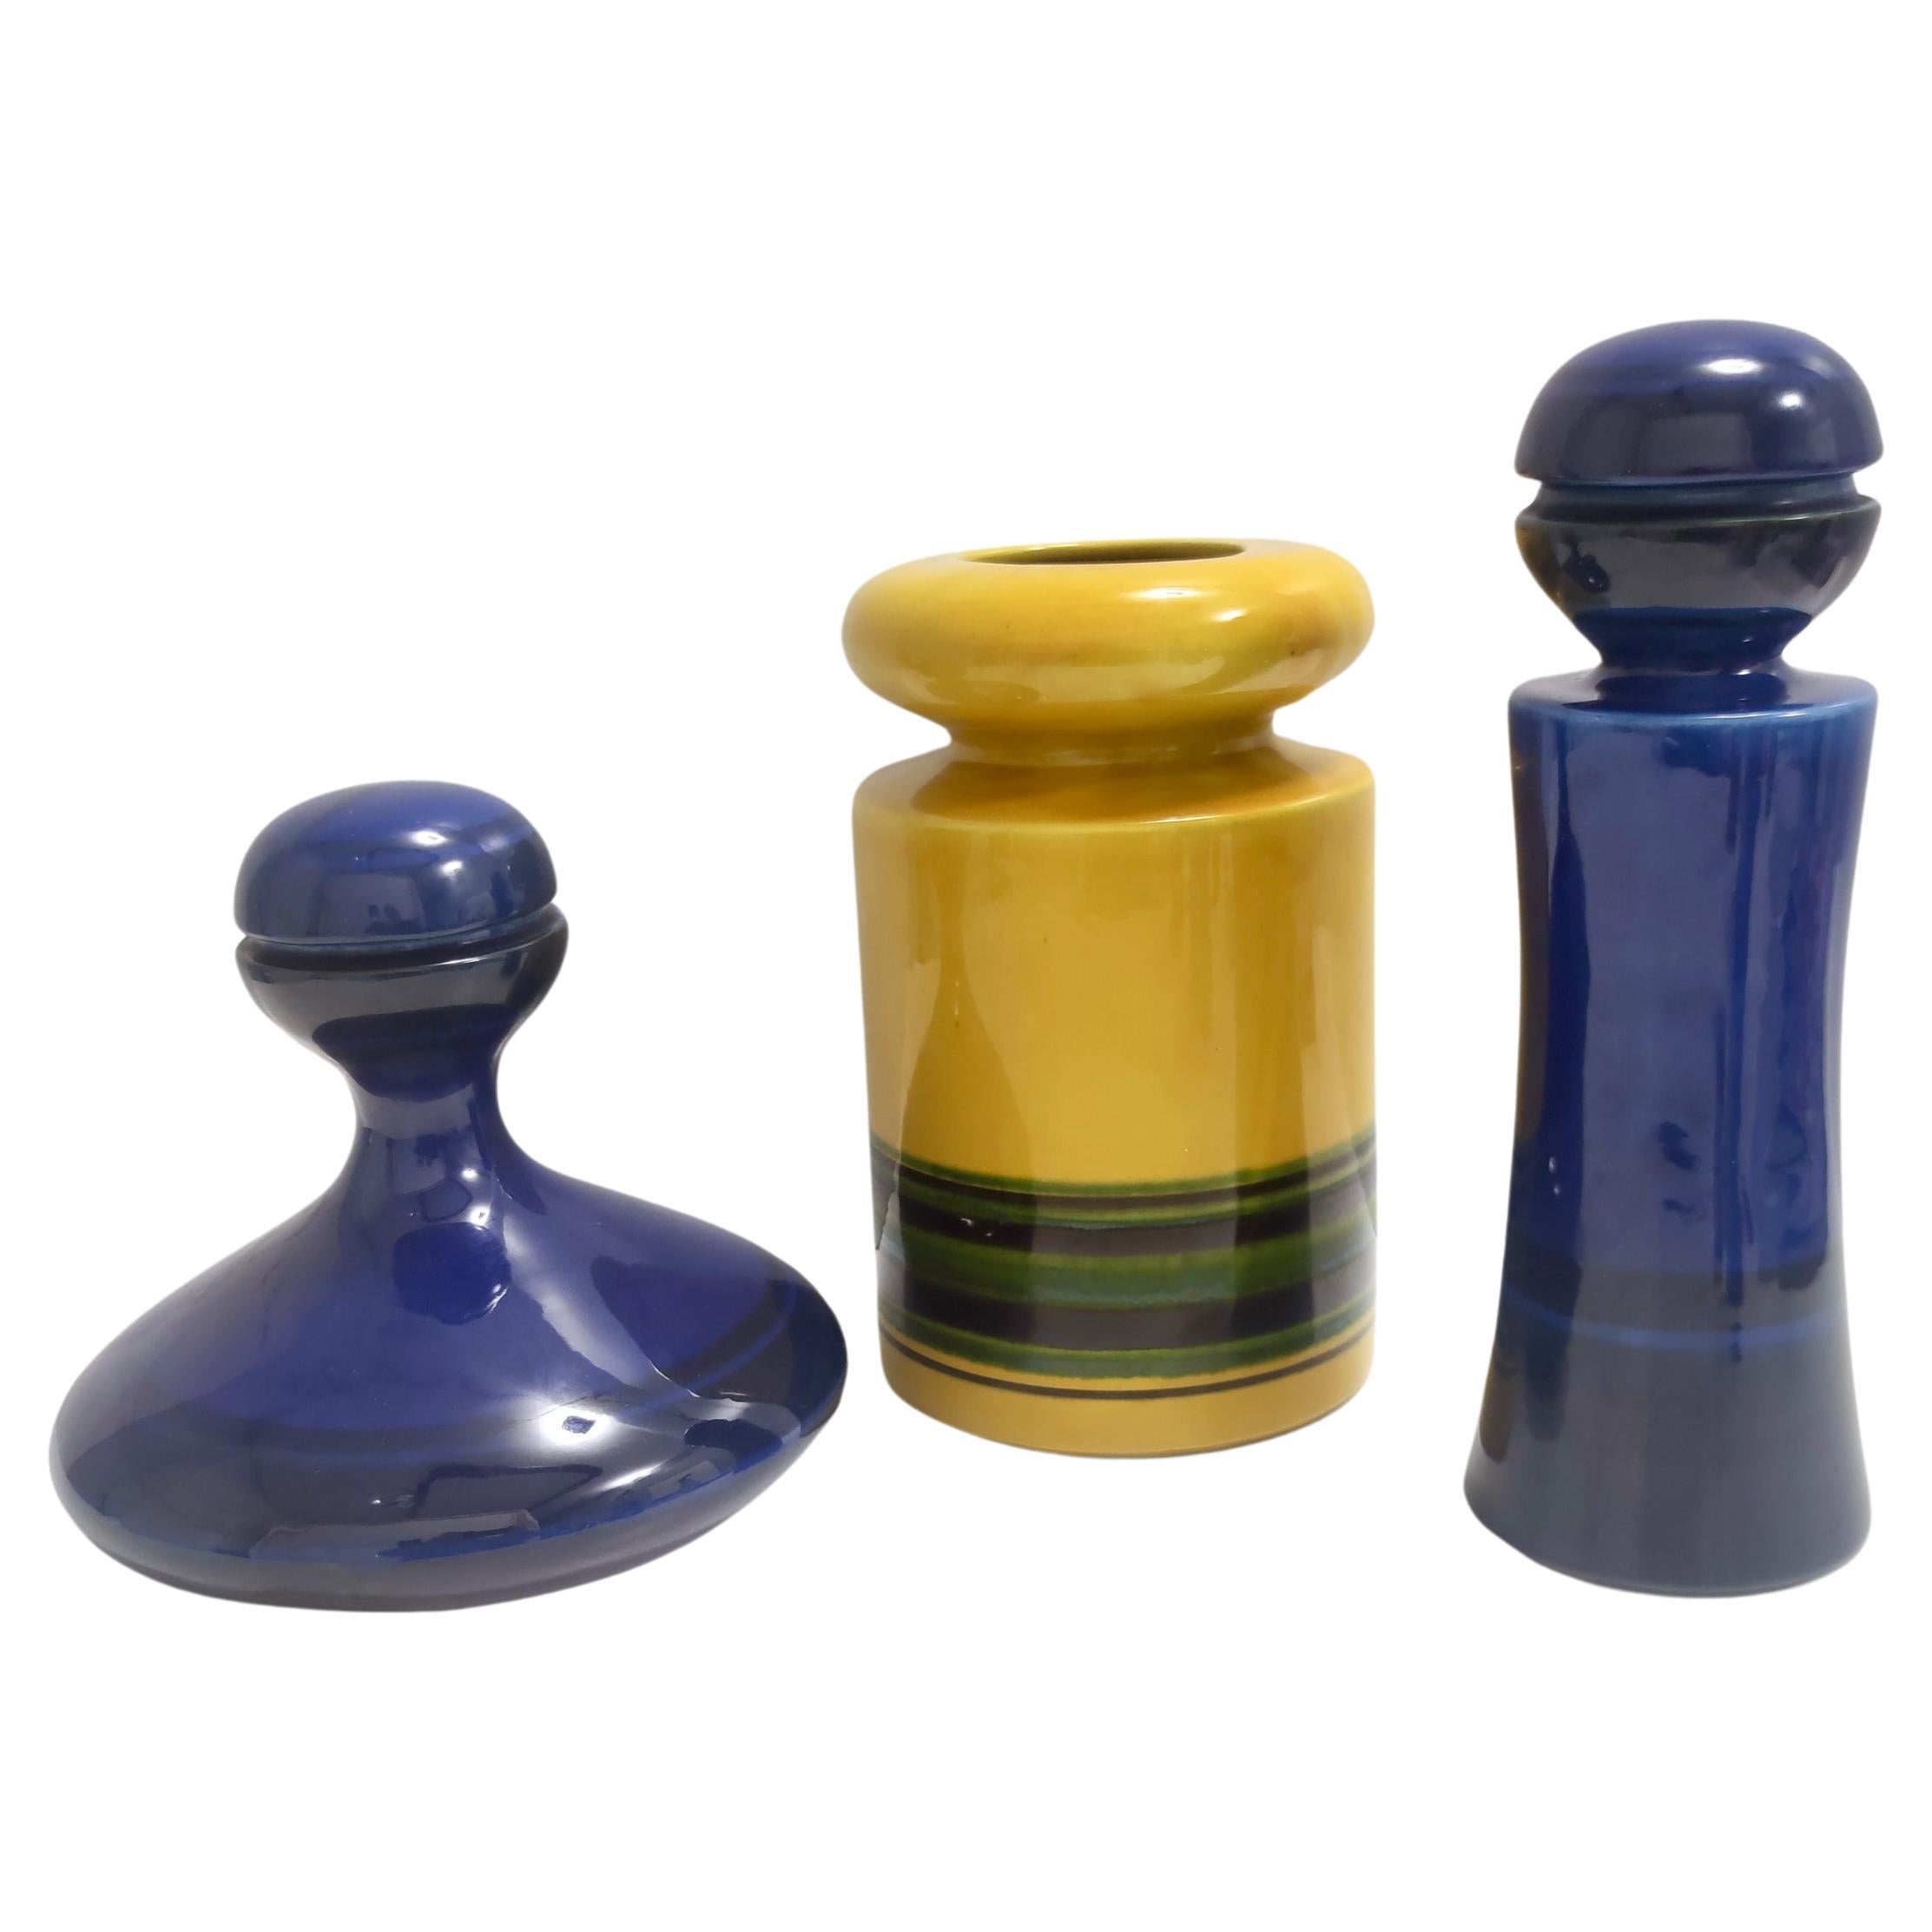 Set of Three Postmodern Blue and Yellow Glazed Vase and Bottles by Parravicini